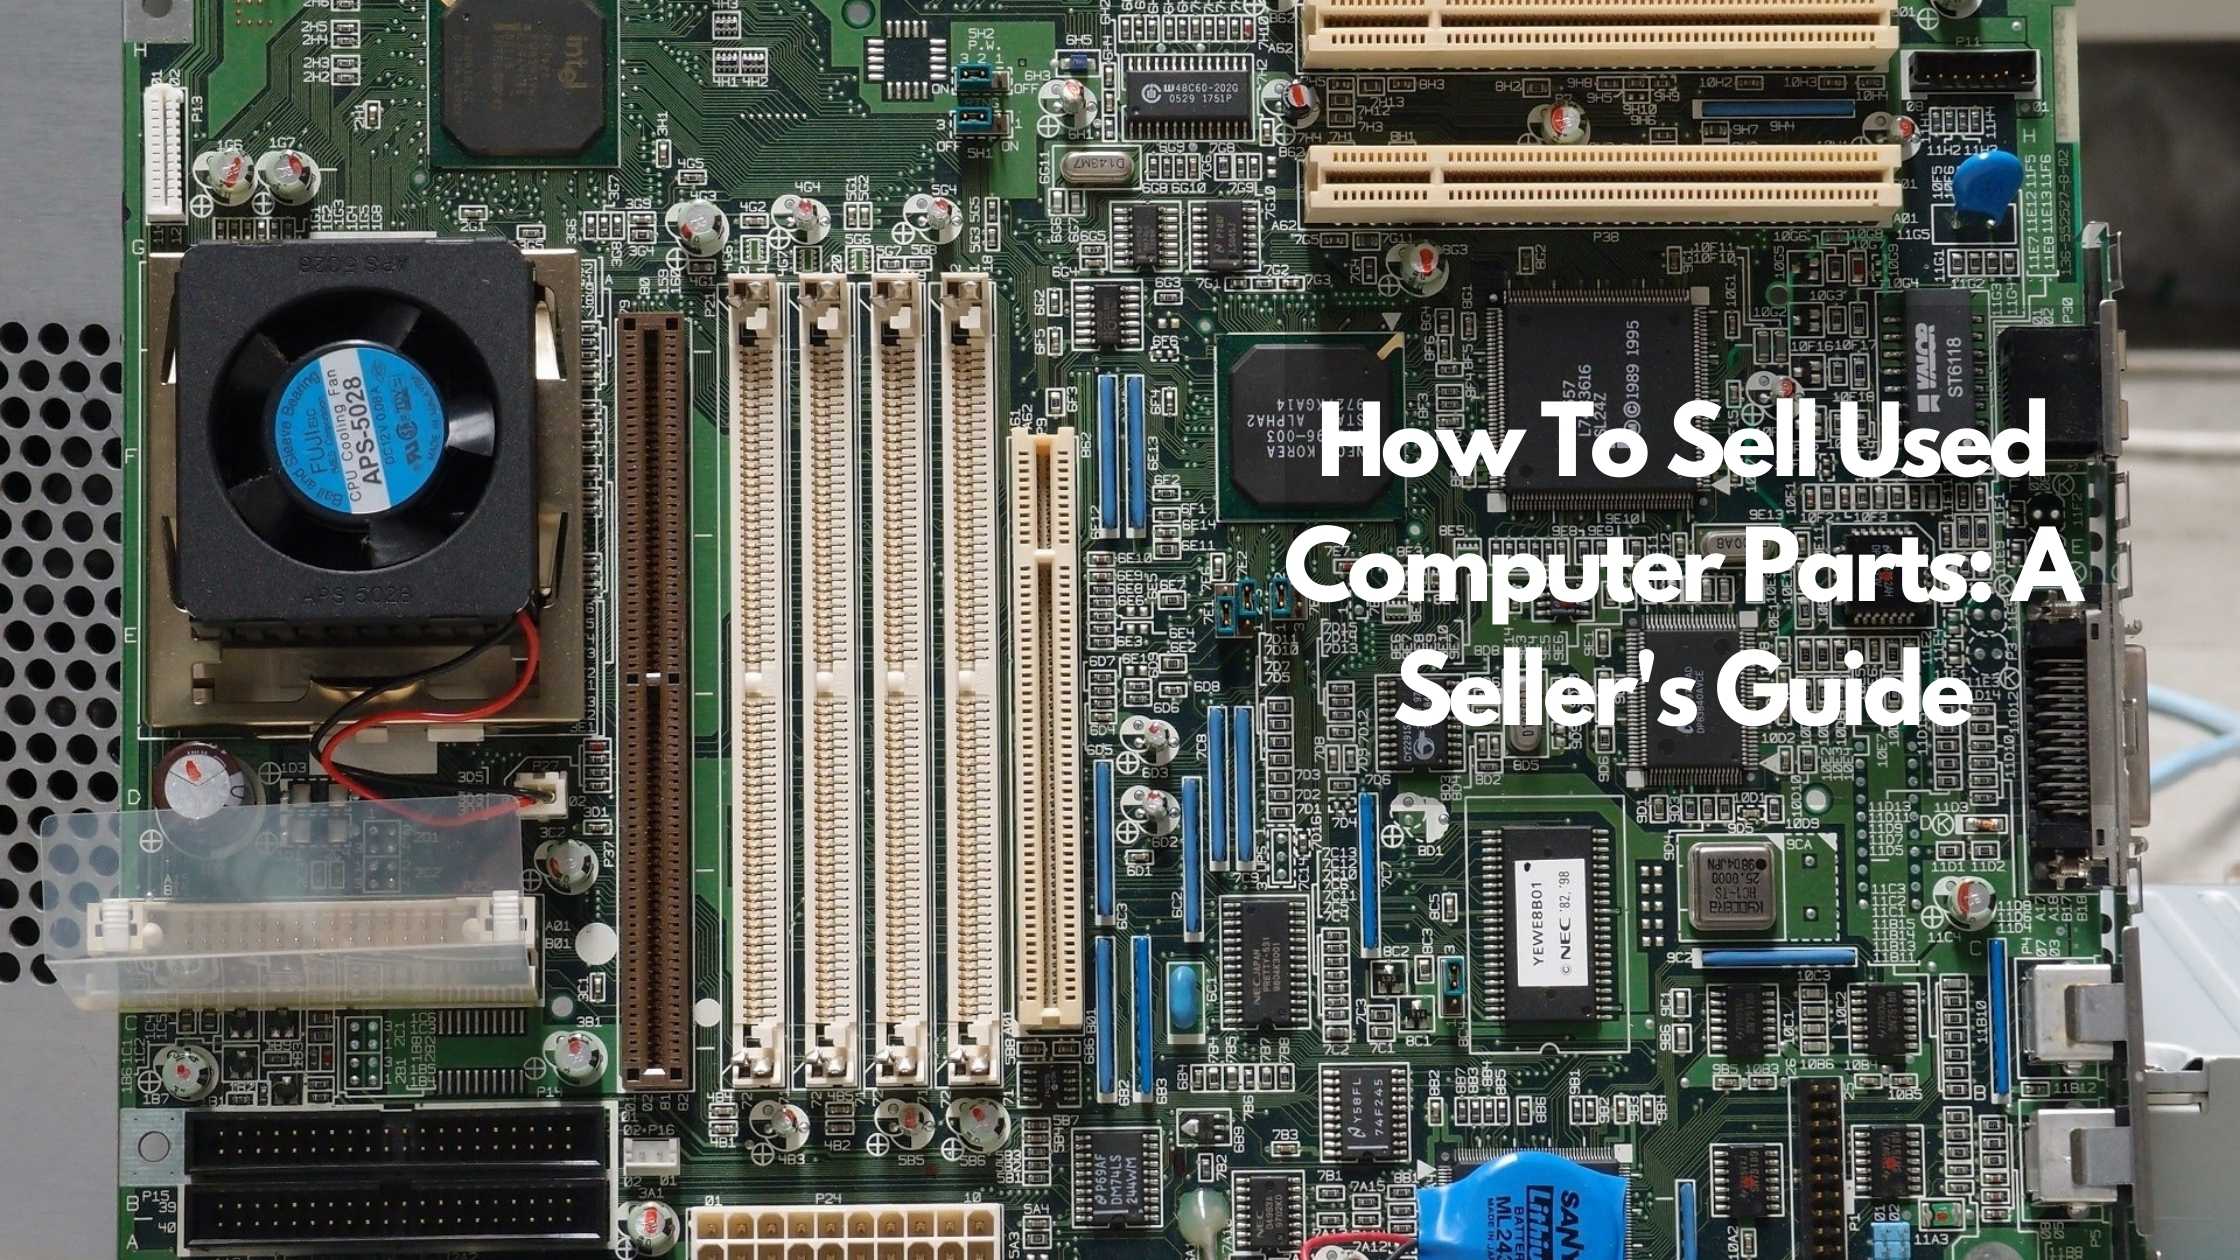 How To Sell Used Computer Parts A Selle's Guide